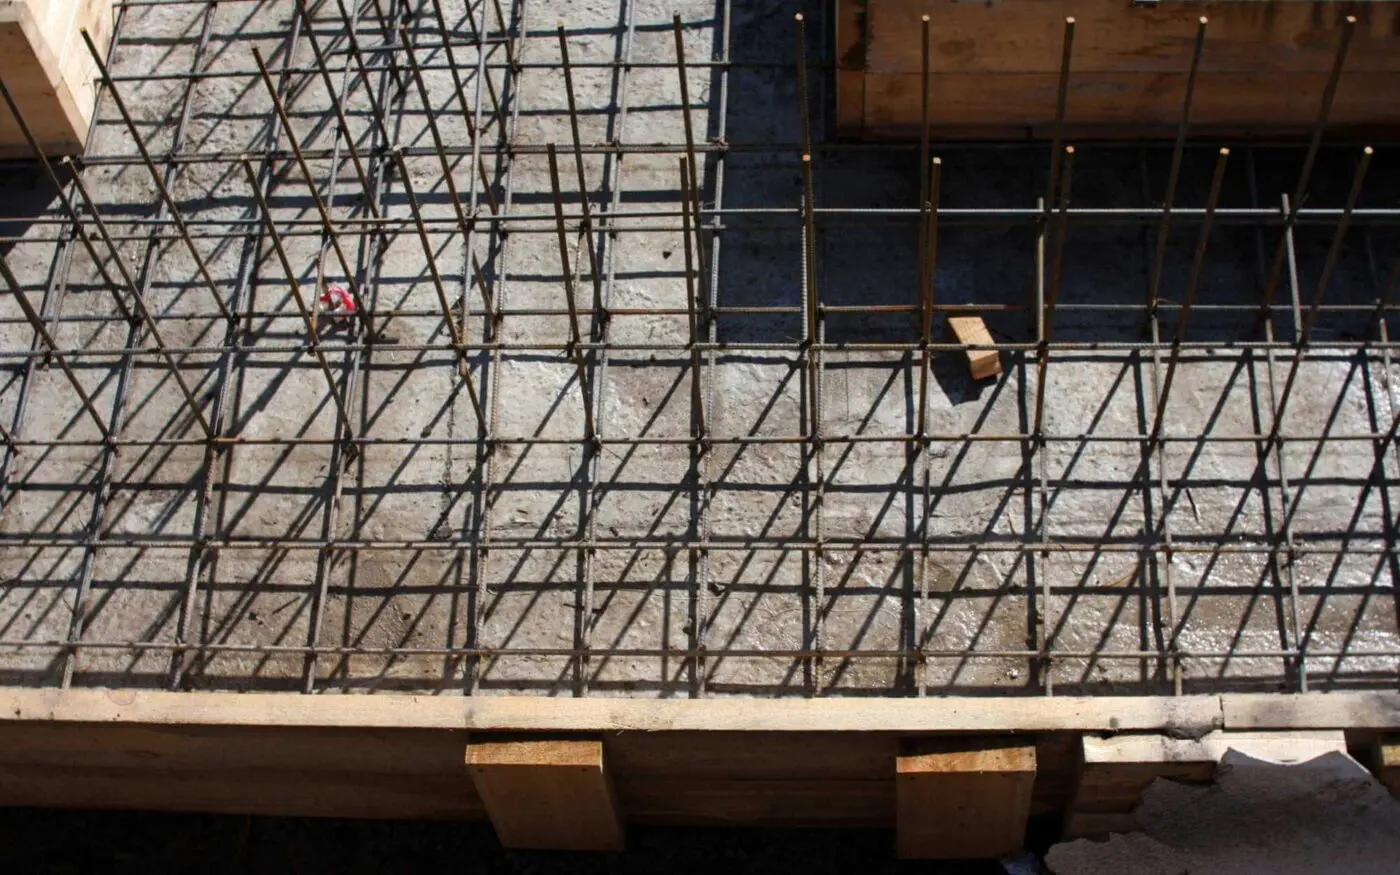 An overhead view of a Miami concrete construction site shows a concrete slab reinforced with a grid of steel rebar. Wooden planks line the edges of the slab, and a small red object sits on the left side. Shadows from the rebar cast a geometric pattern on this decorative concrete surface.